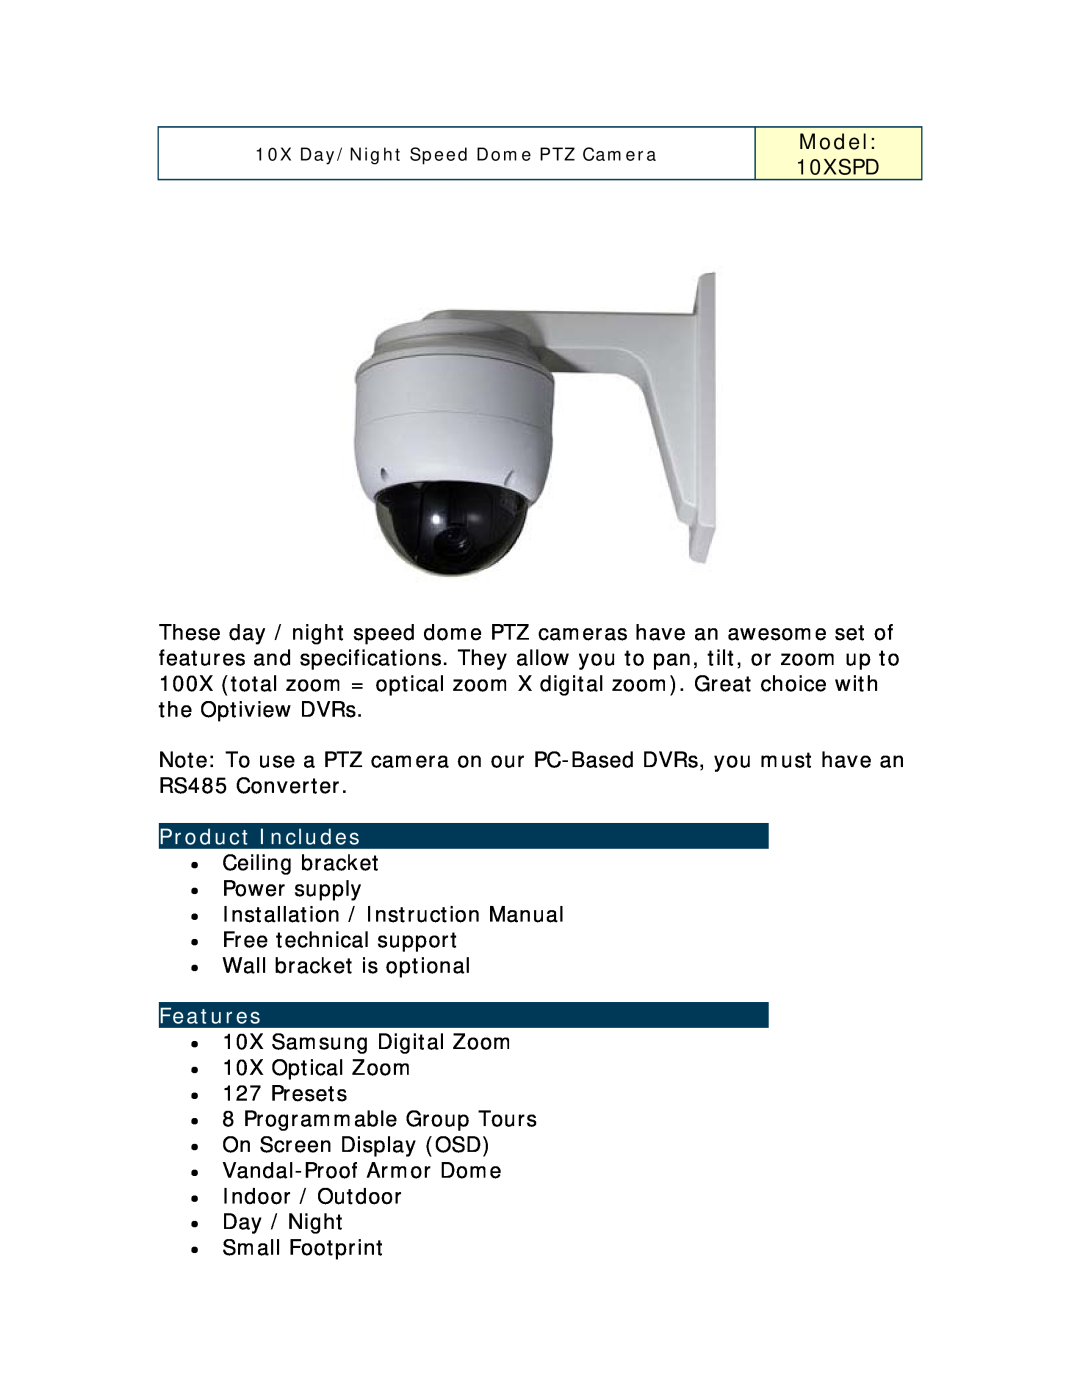 Optiview 10XSPD specifications Product Includes, Features, Model 